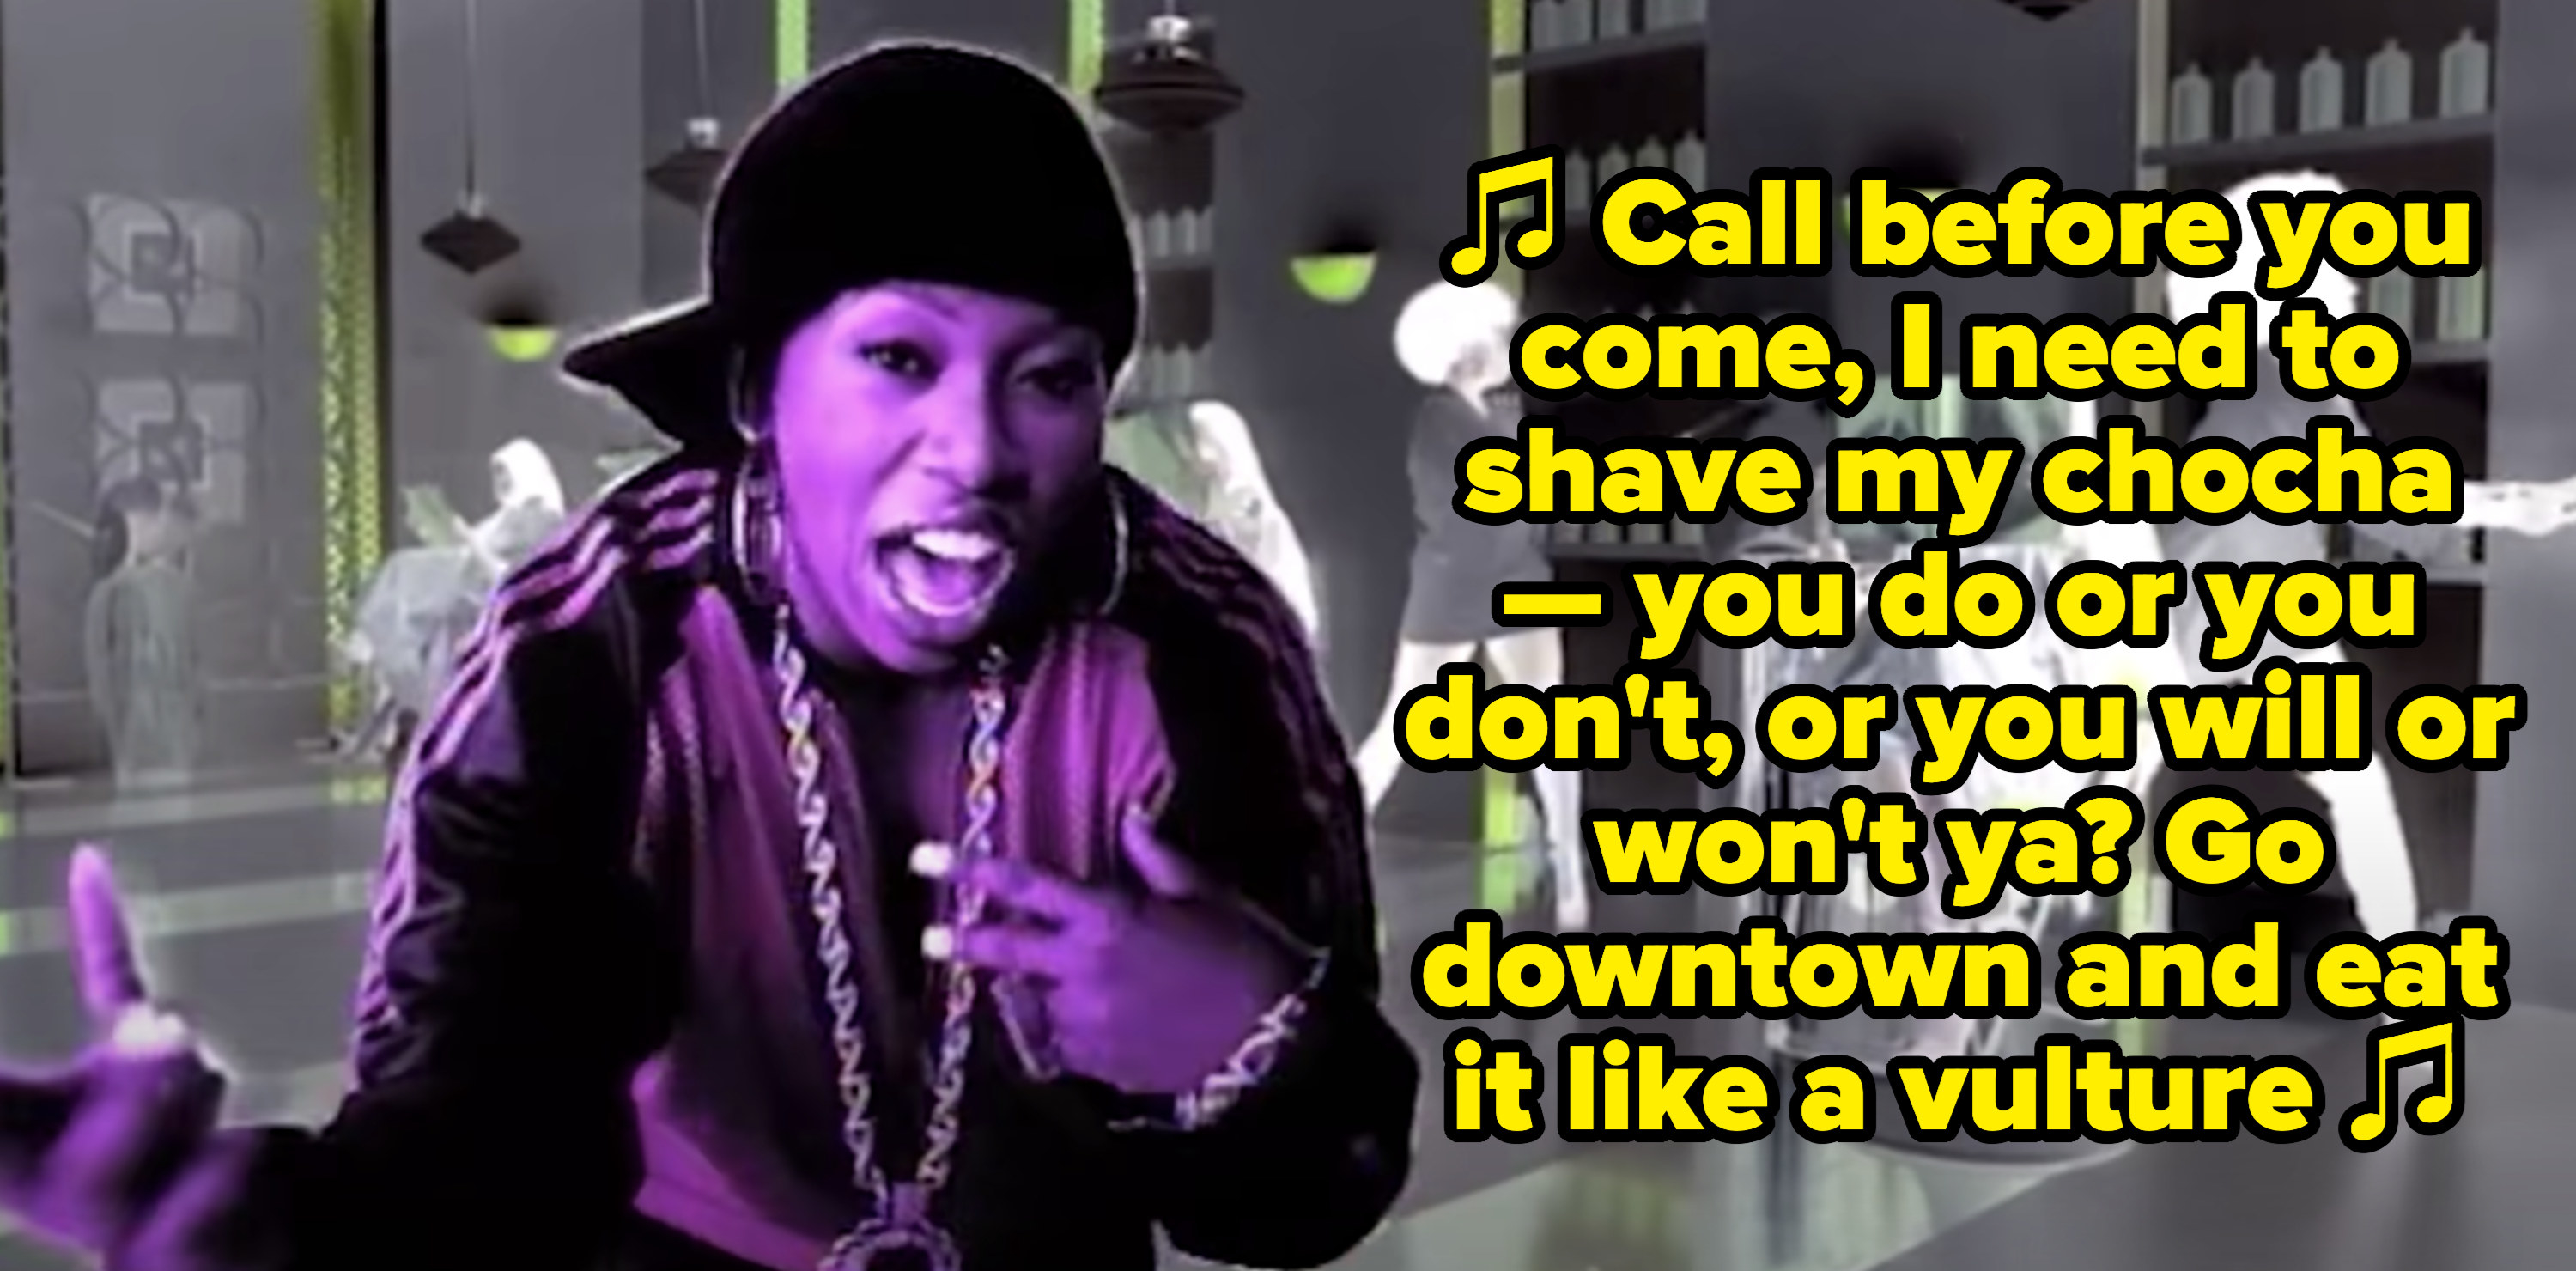 Missy Elliott rapping, &quot;Call before you come, I need to shave my chocha — you do or you don&#x27;t, or you will or won&#x27;t ya? Go downtown and eat it like a vulture&quot;